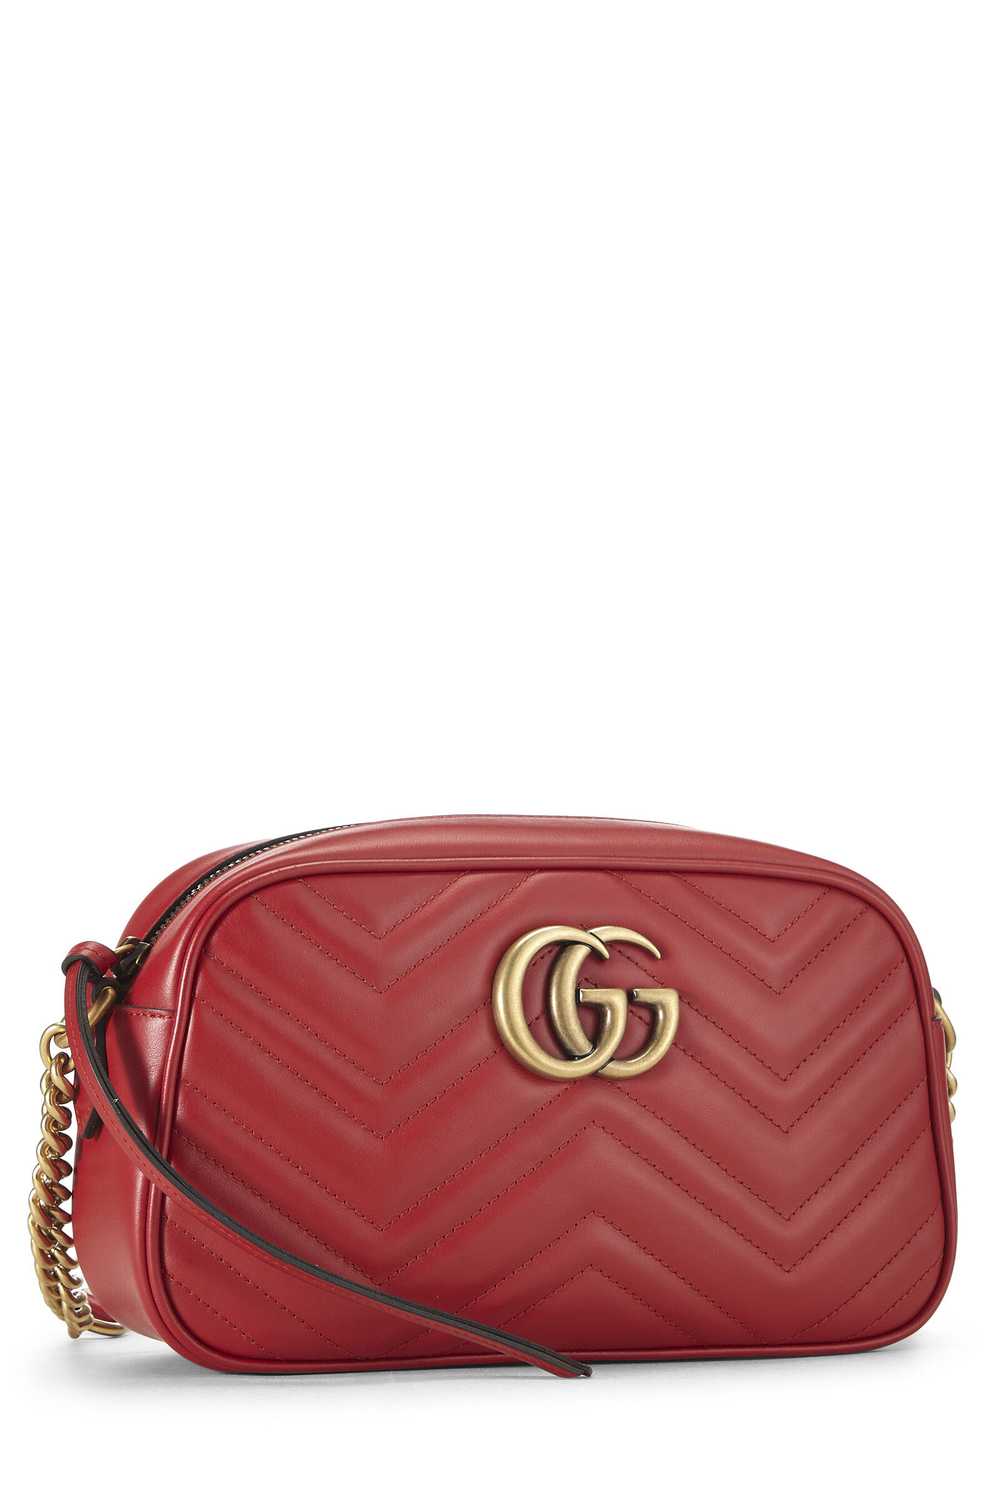 Red Leather GG Marmont Crossbody Bag Small - image 2